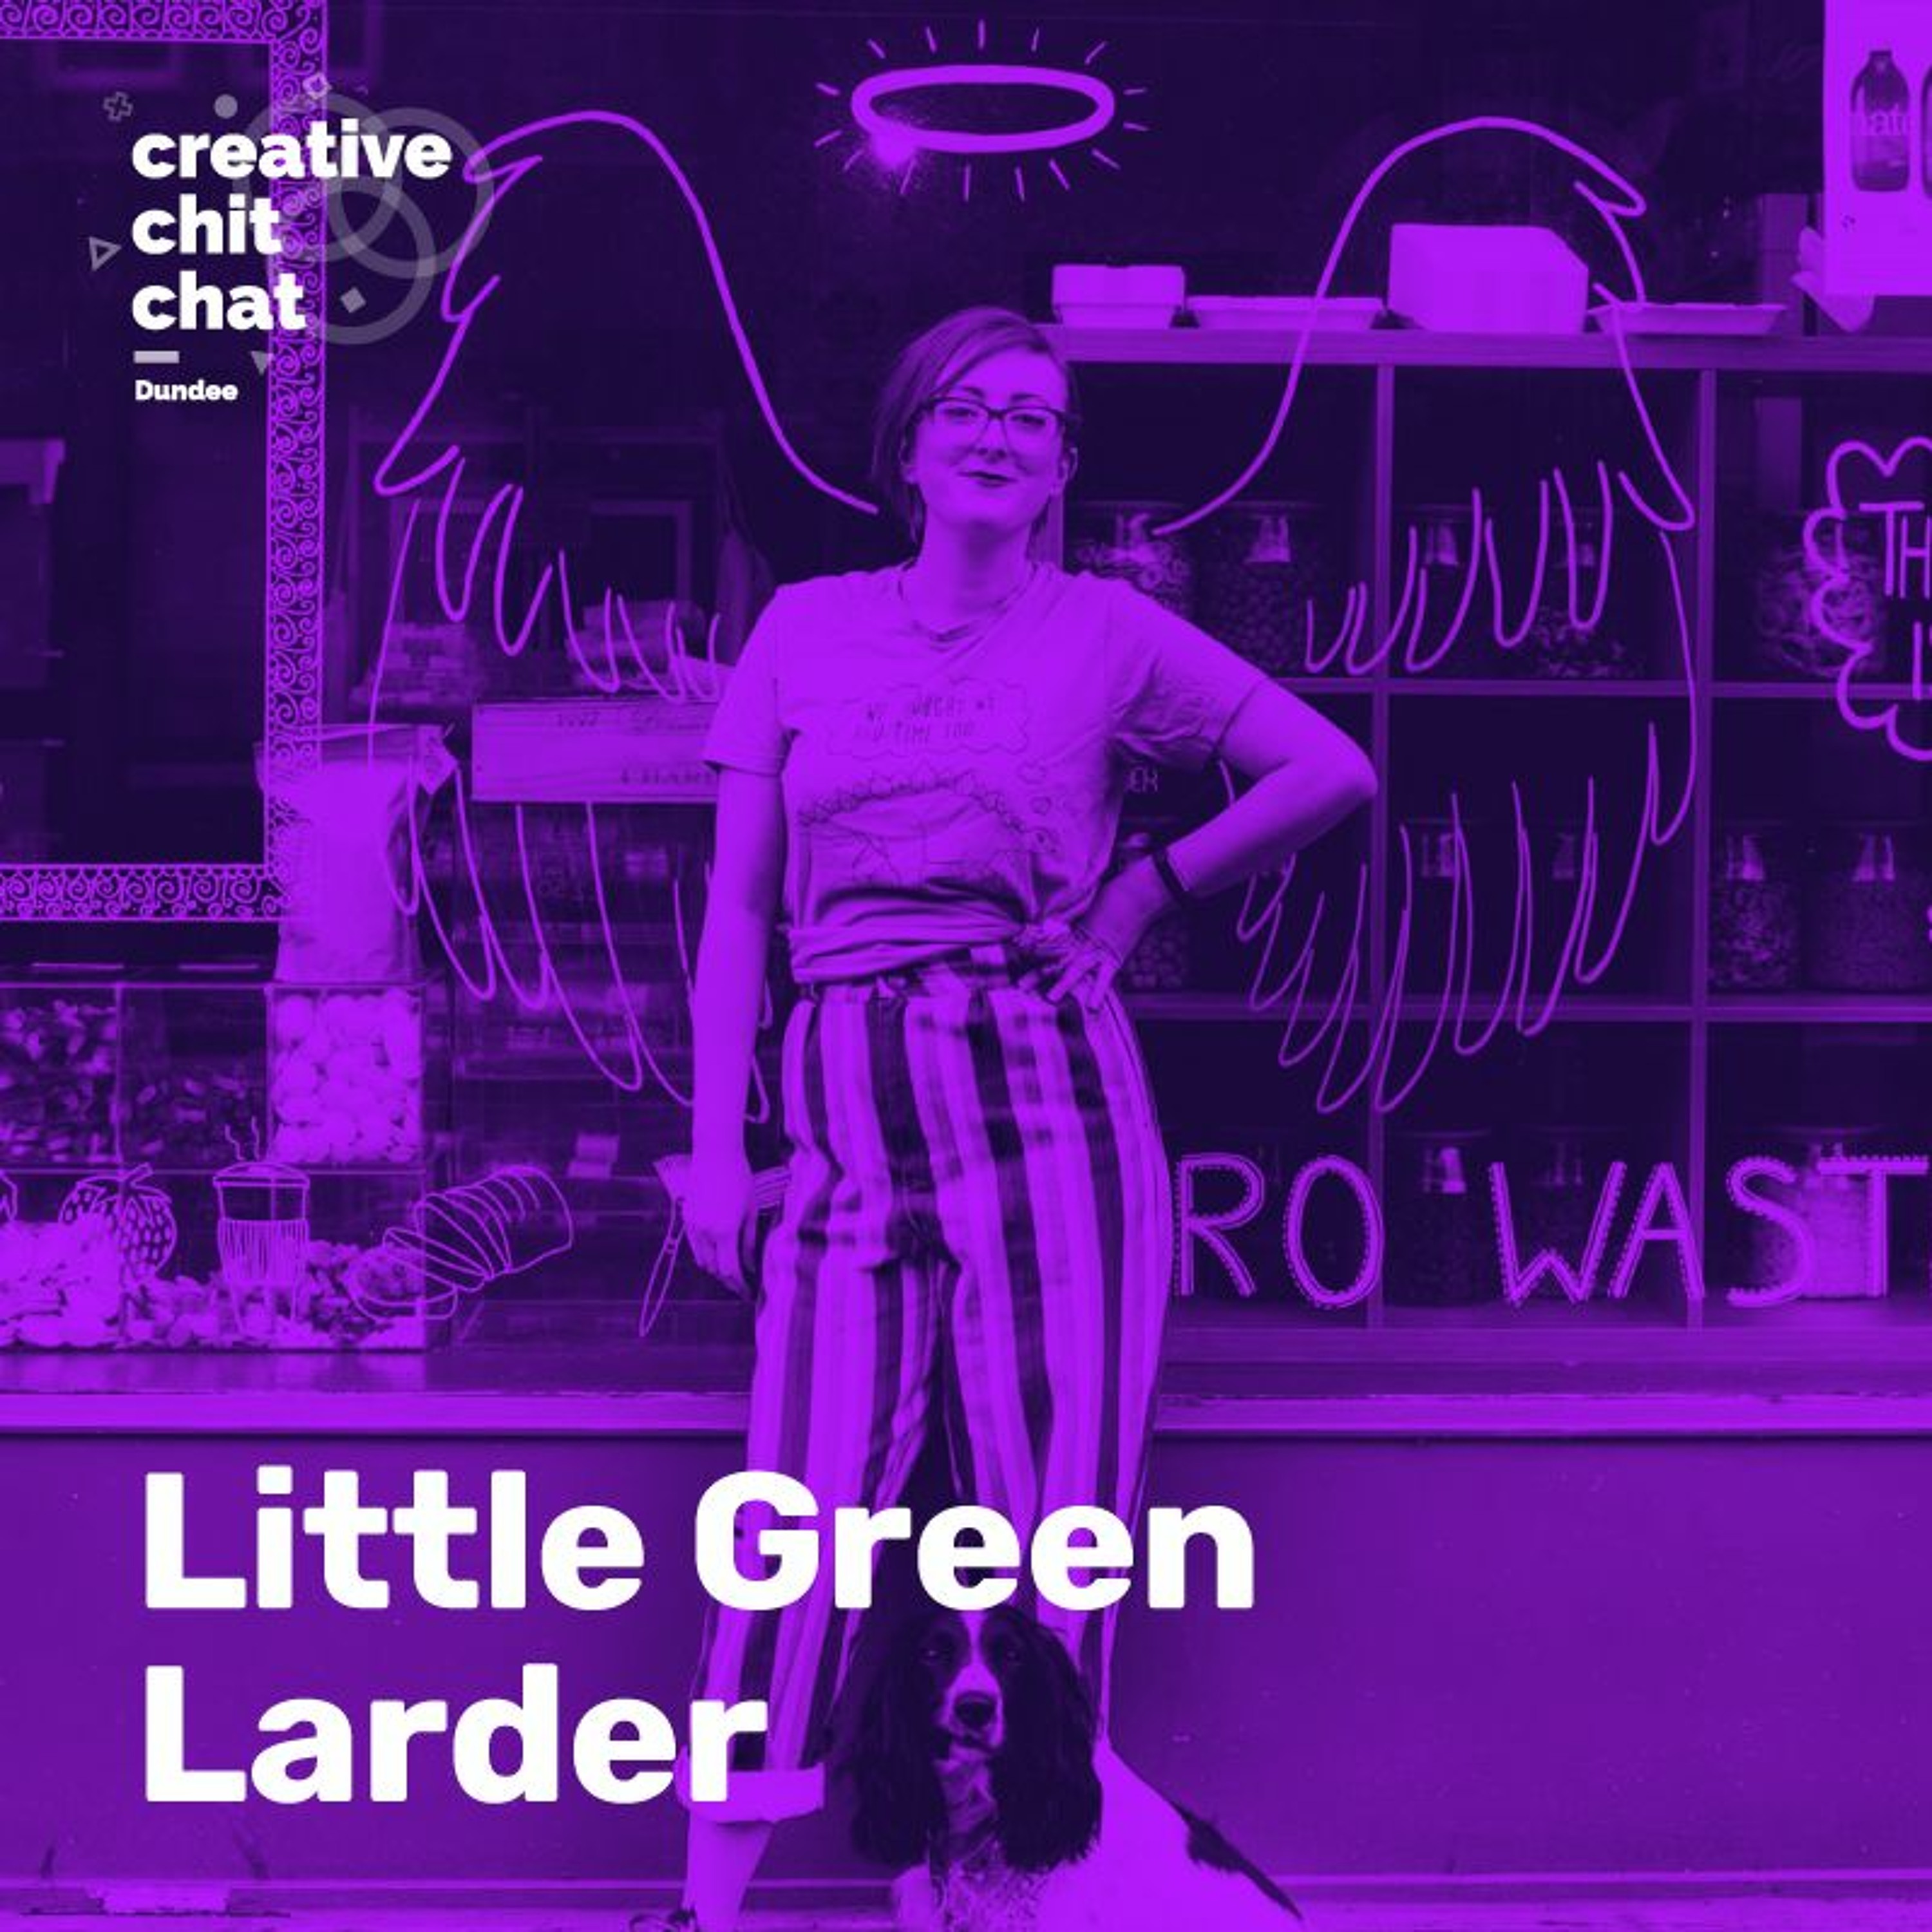 Little Green Larder - Creating a shop to help people make more sustainable choices